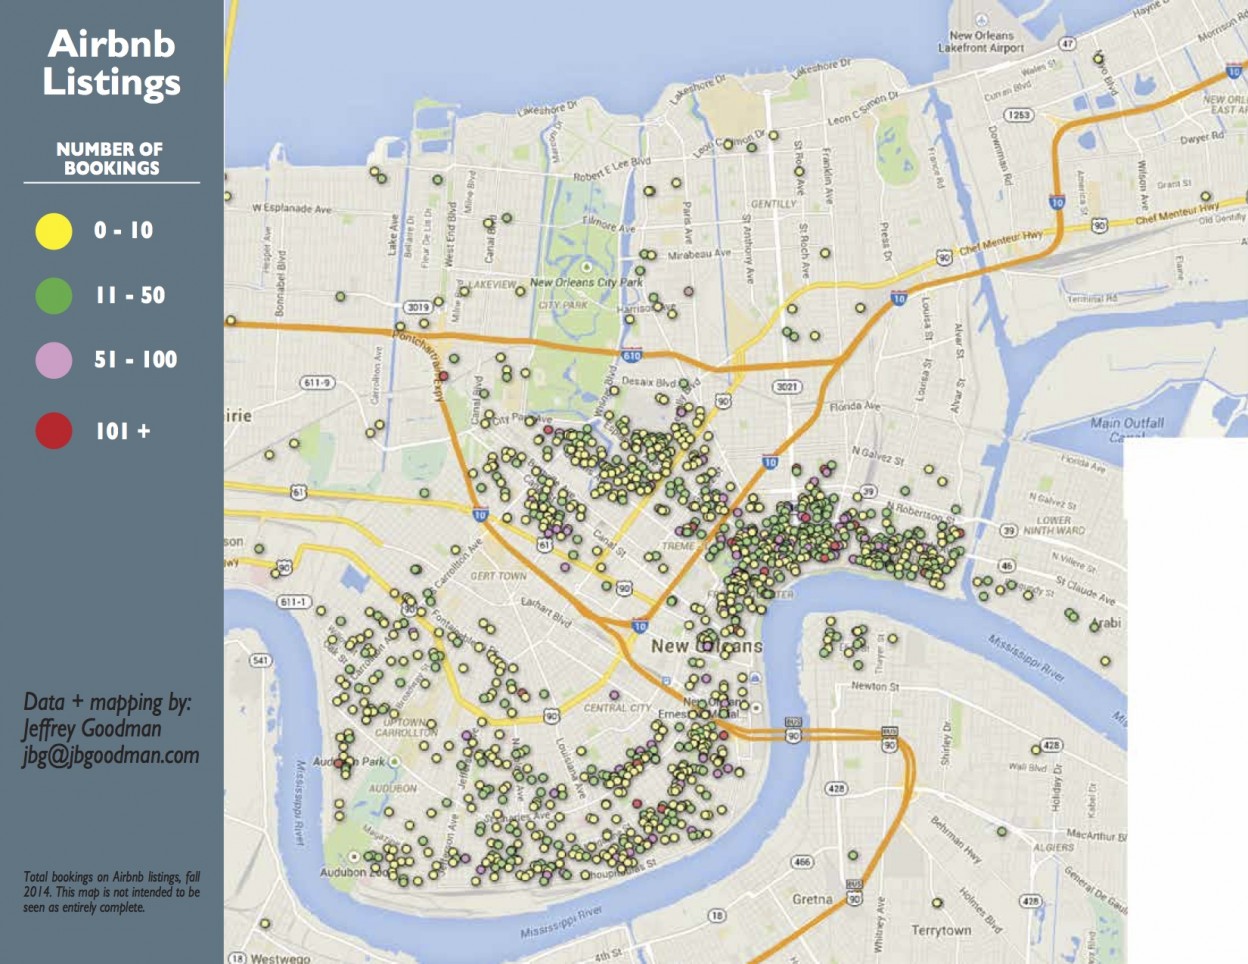 Airbnb Listings in New Orleans - Short Term Rentals 